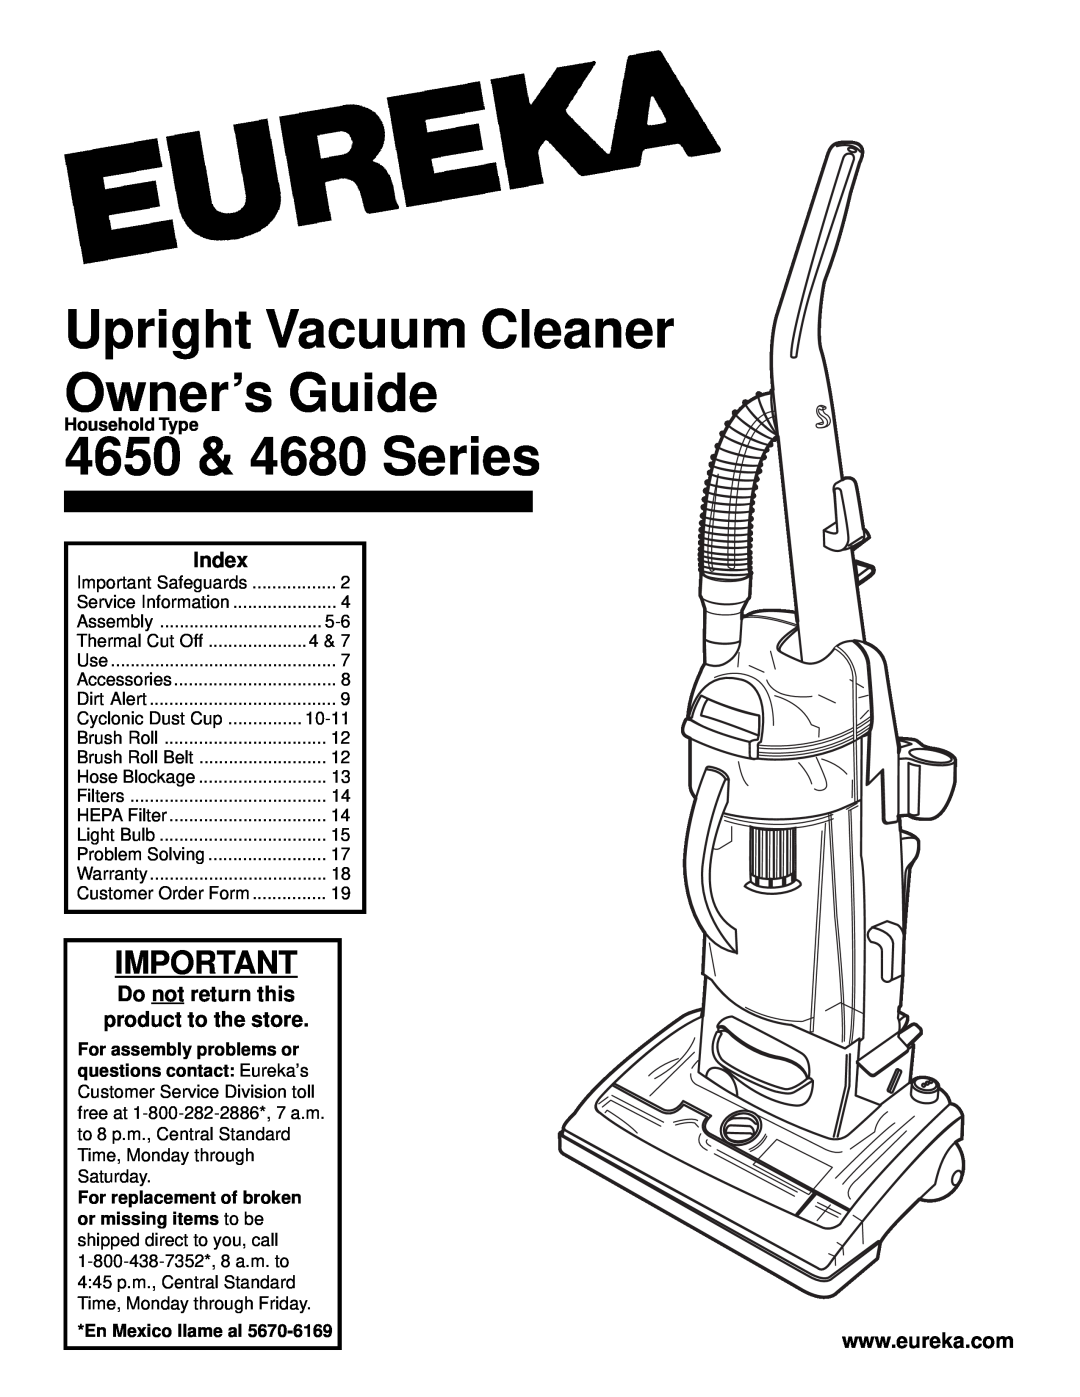 Eureka warranty Upright Vacuum Cleaner Owner’s Guide, 4650 & 4680 Series, Index, Do not return this 